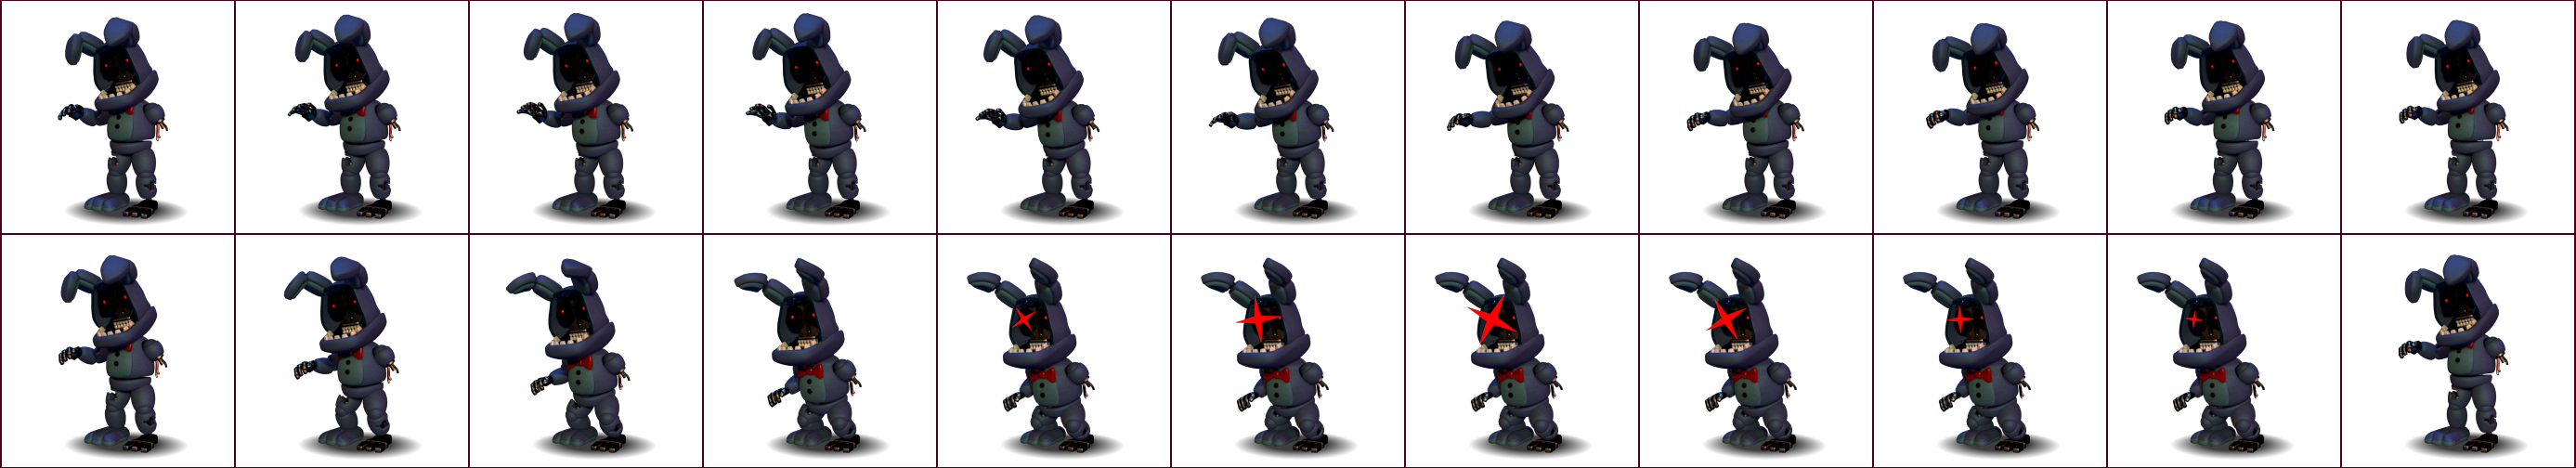 FNaF World - Withered Bonnie